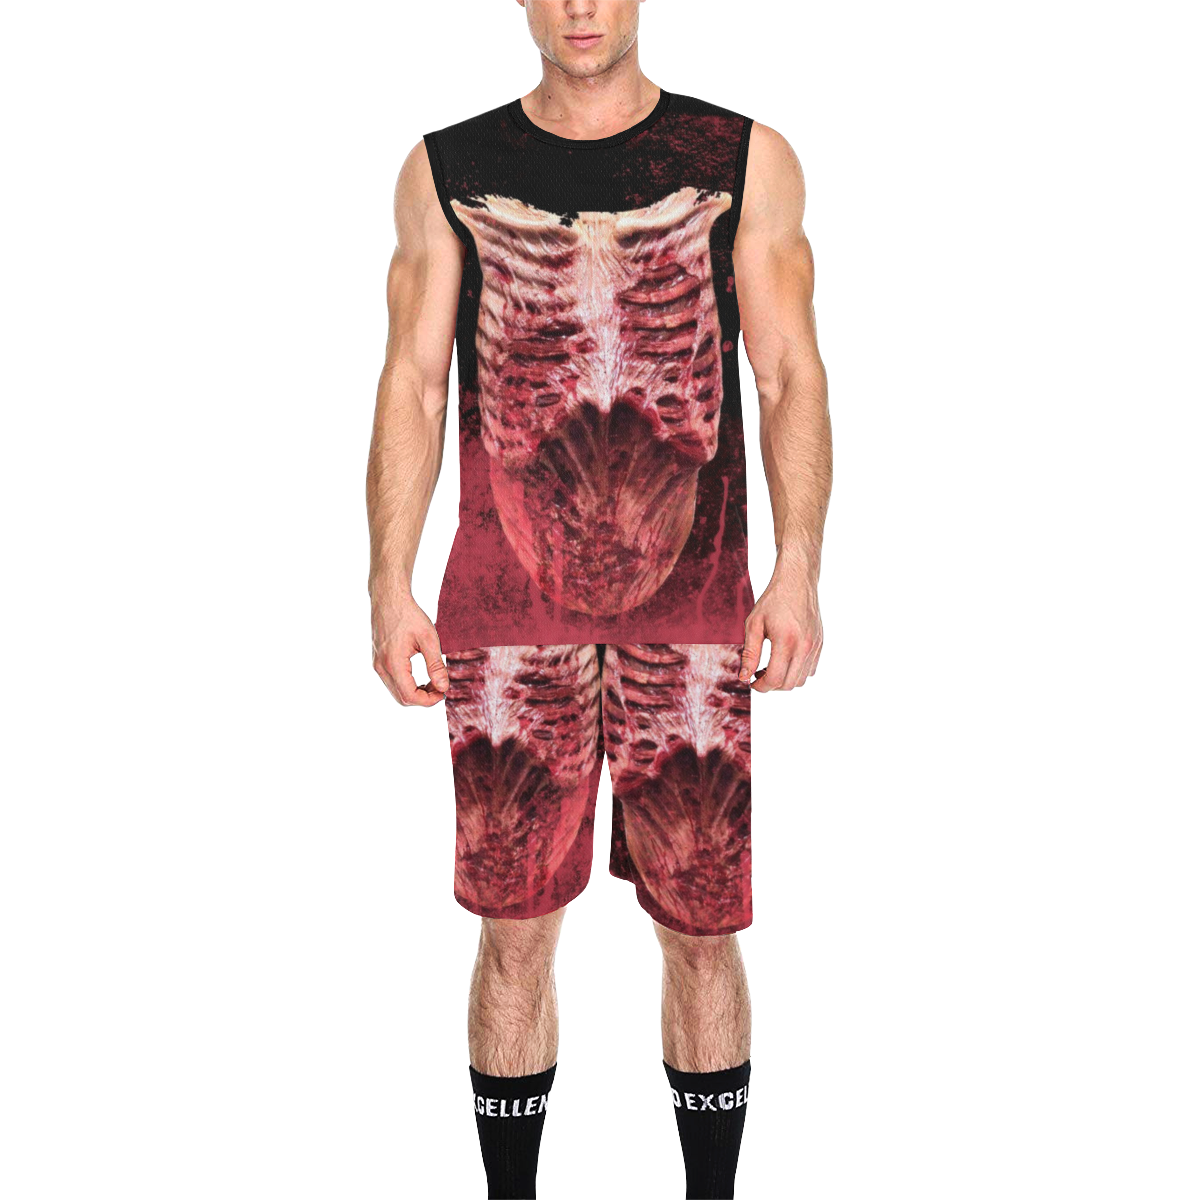 Scary Blood by Artdream All Over Print Basketball Uniform